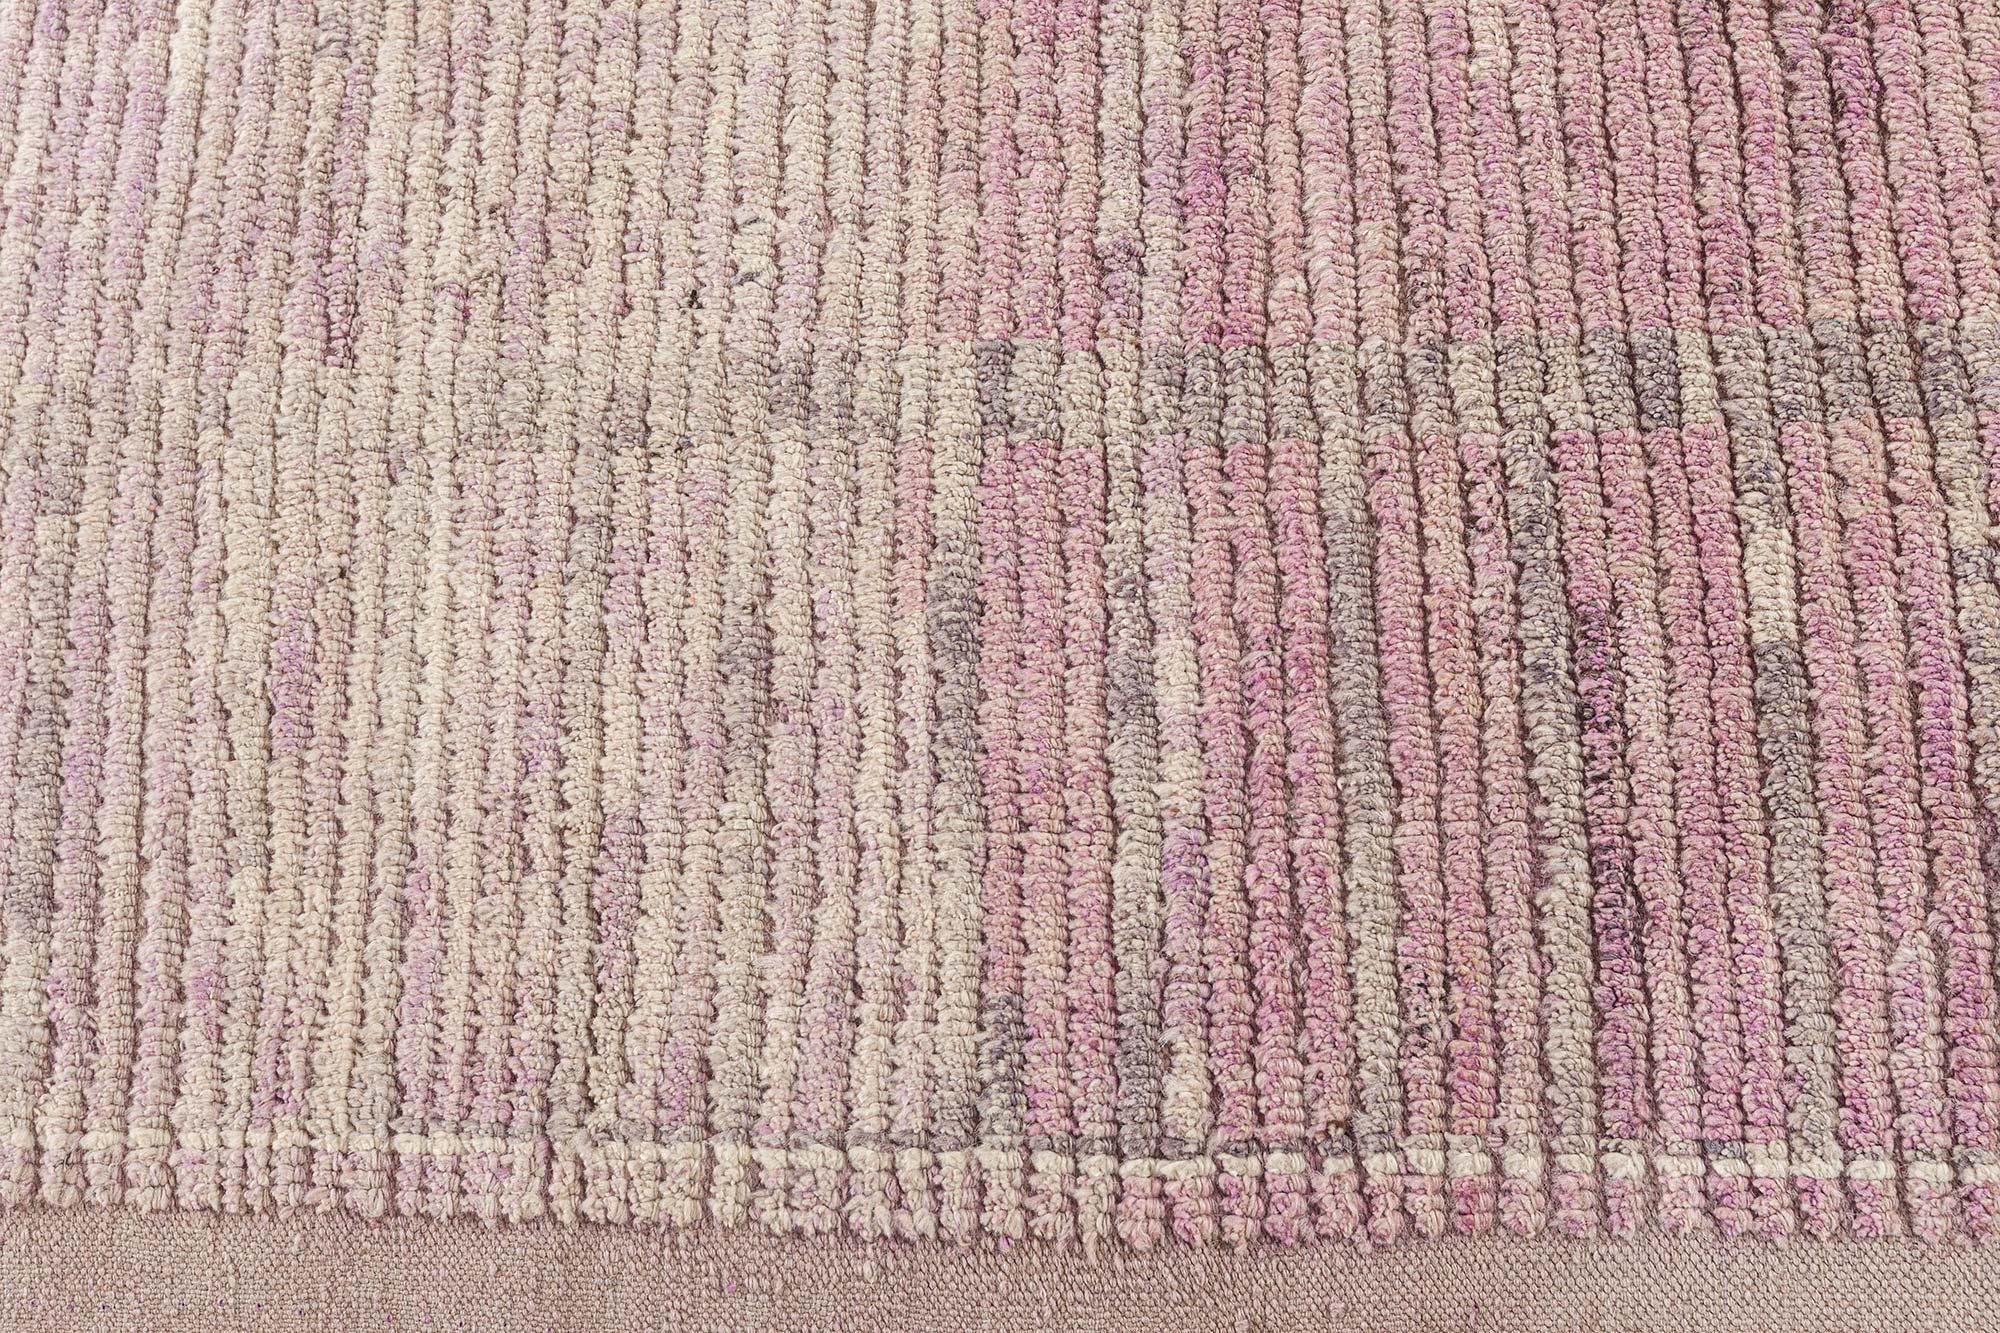 Contemporary Tribal Style Moroccan Rug in Shades of Pink by Doris Leslie Blau For Sale